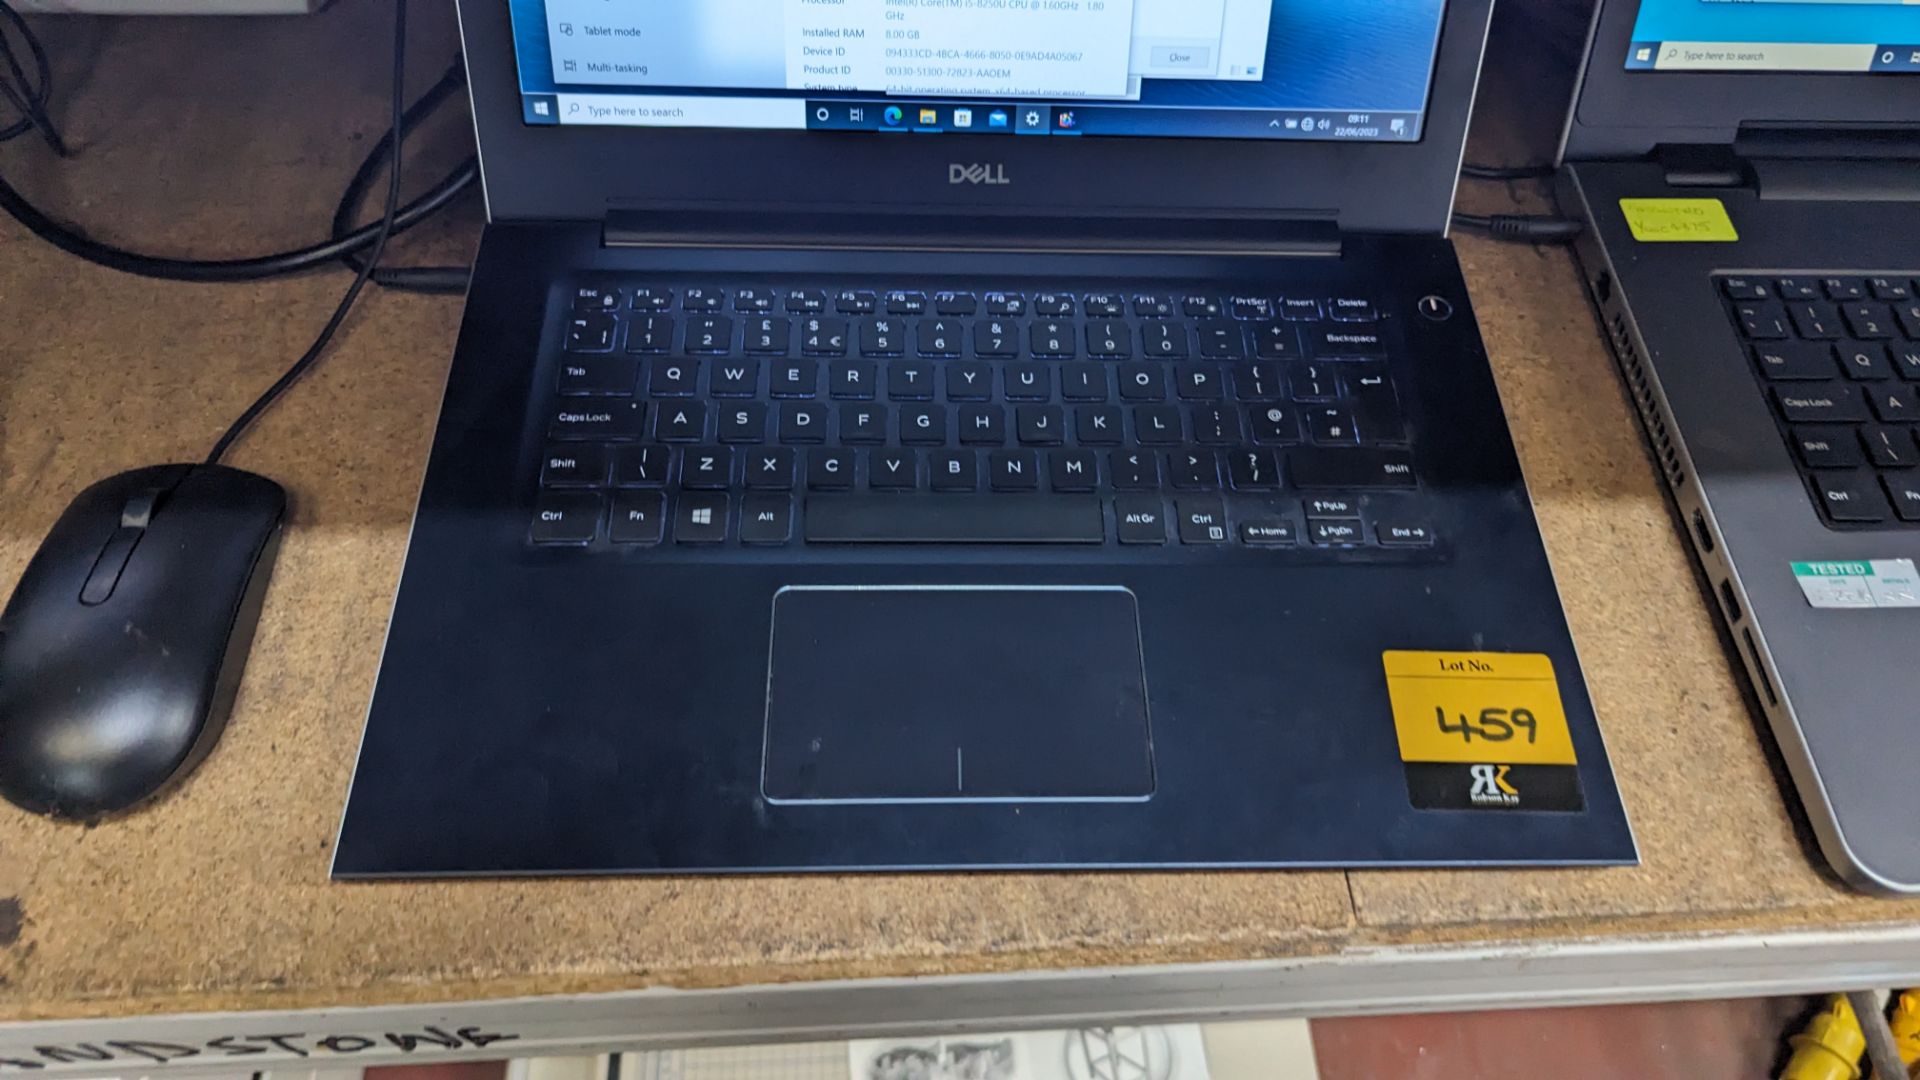 Dell Vostro notebook computer with Intel Core i5-8250 CPU, 8GB RAM, 256GB SSD including power pack/c - Image 5 of 17